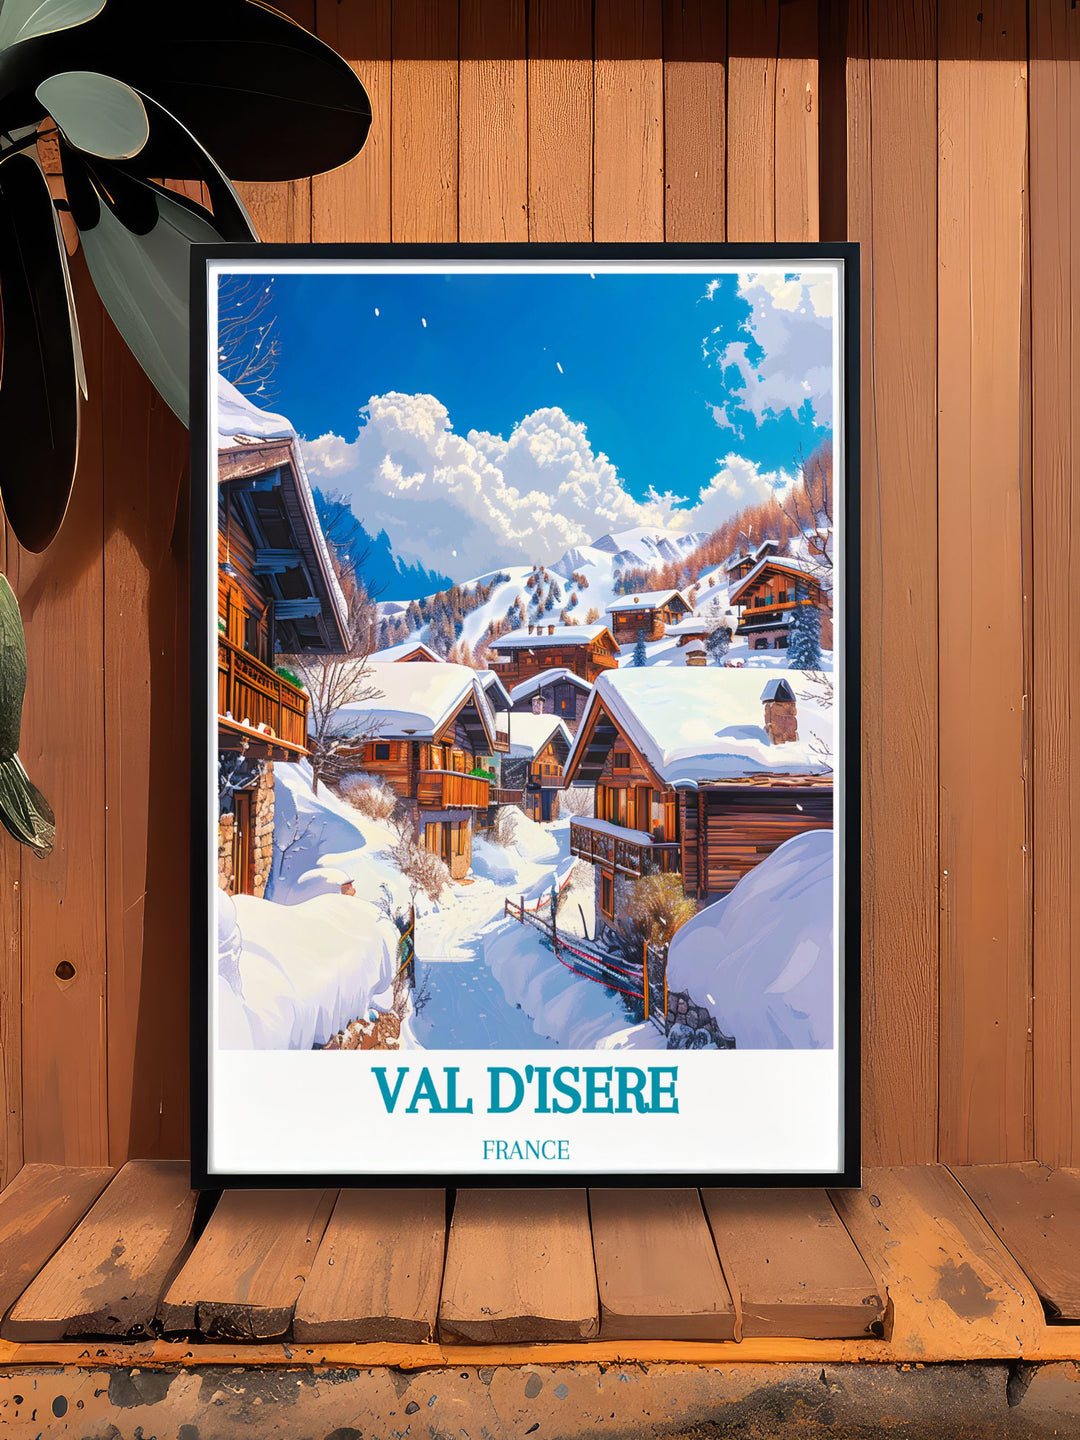 Unveil the scenic beauty of Val dIsere with this stunning art print, showcasing the picturesque village nestled in the Alps.